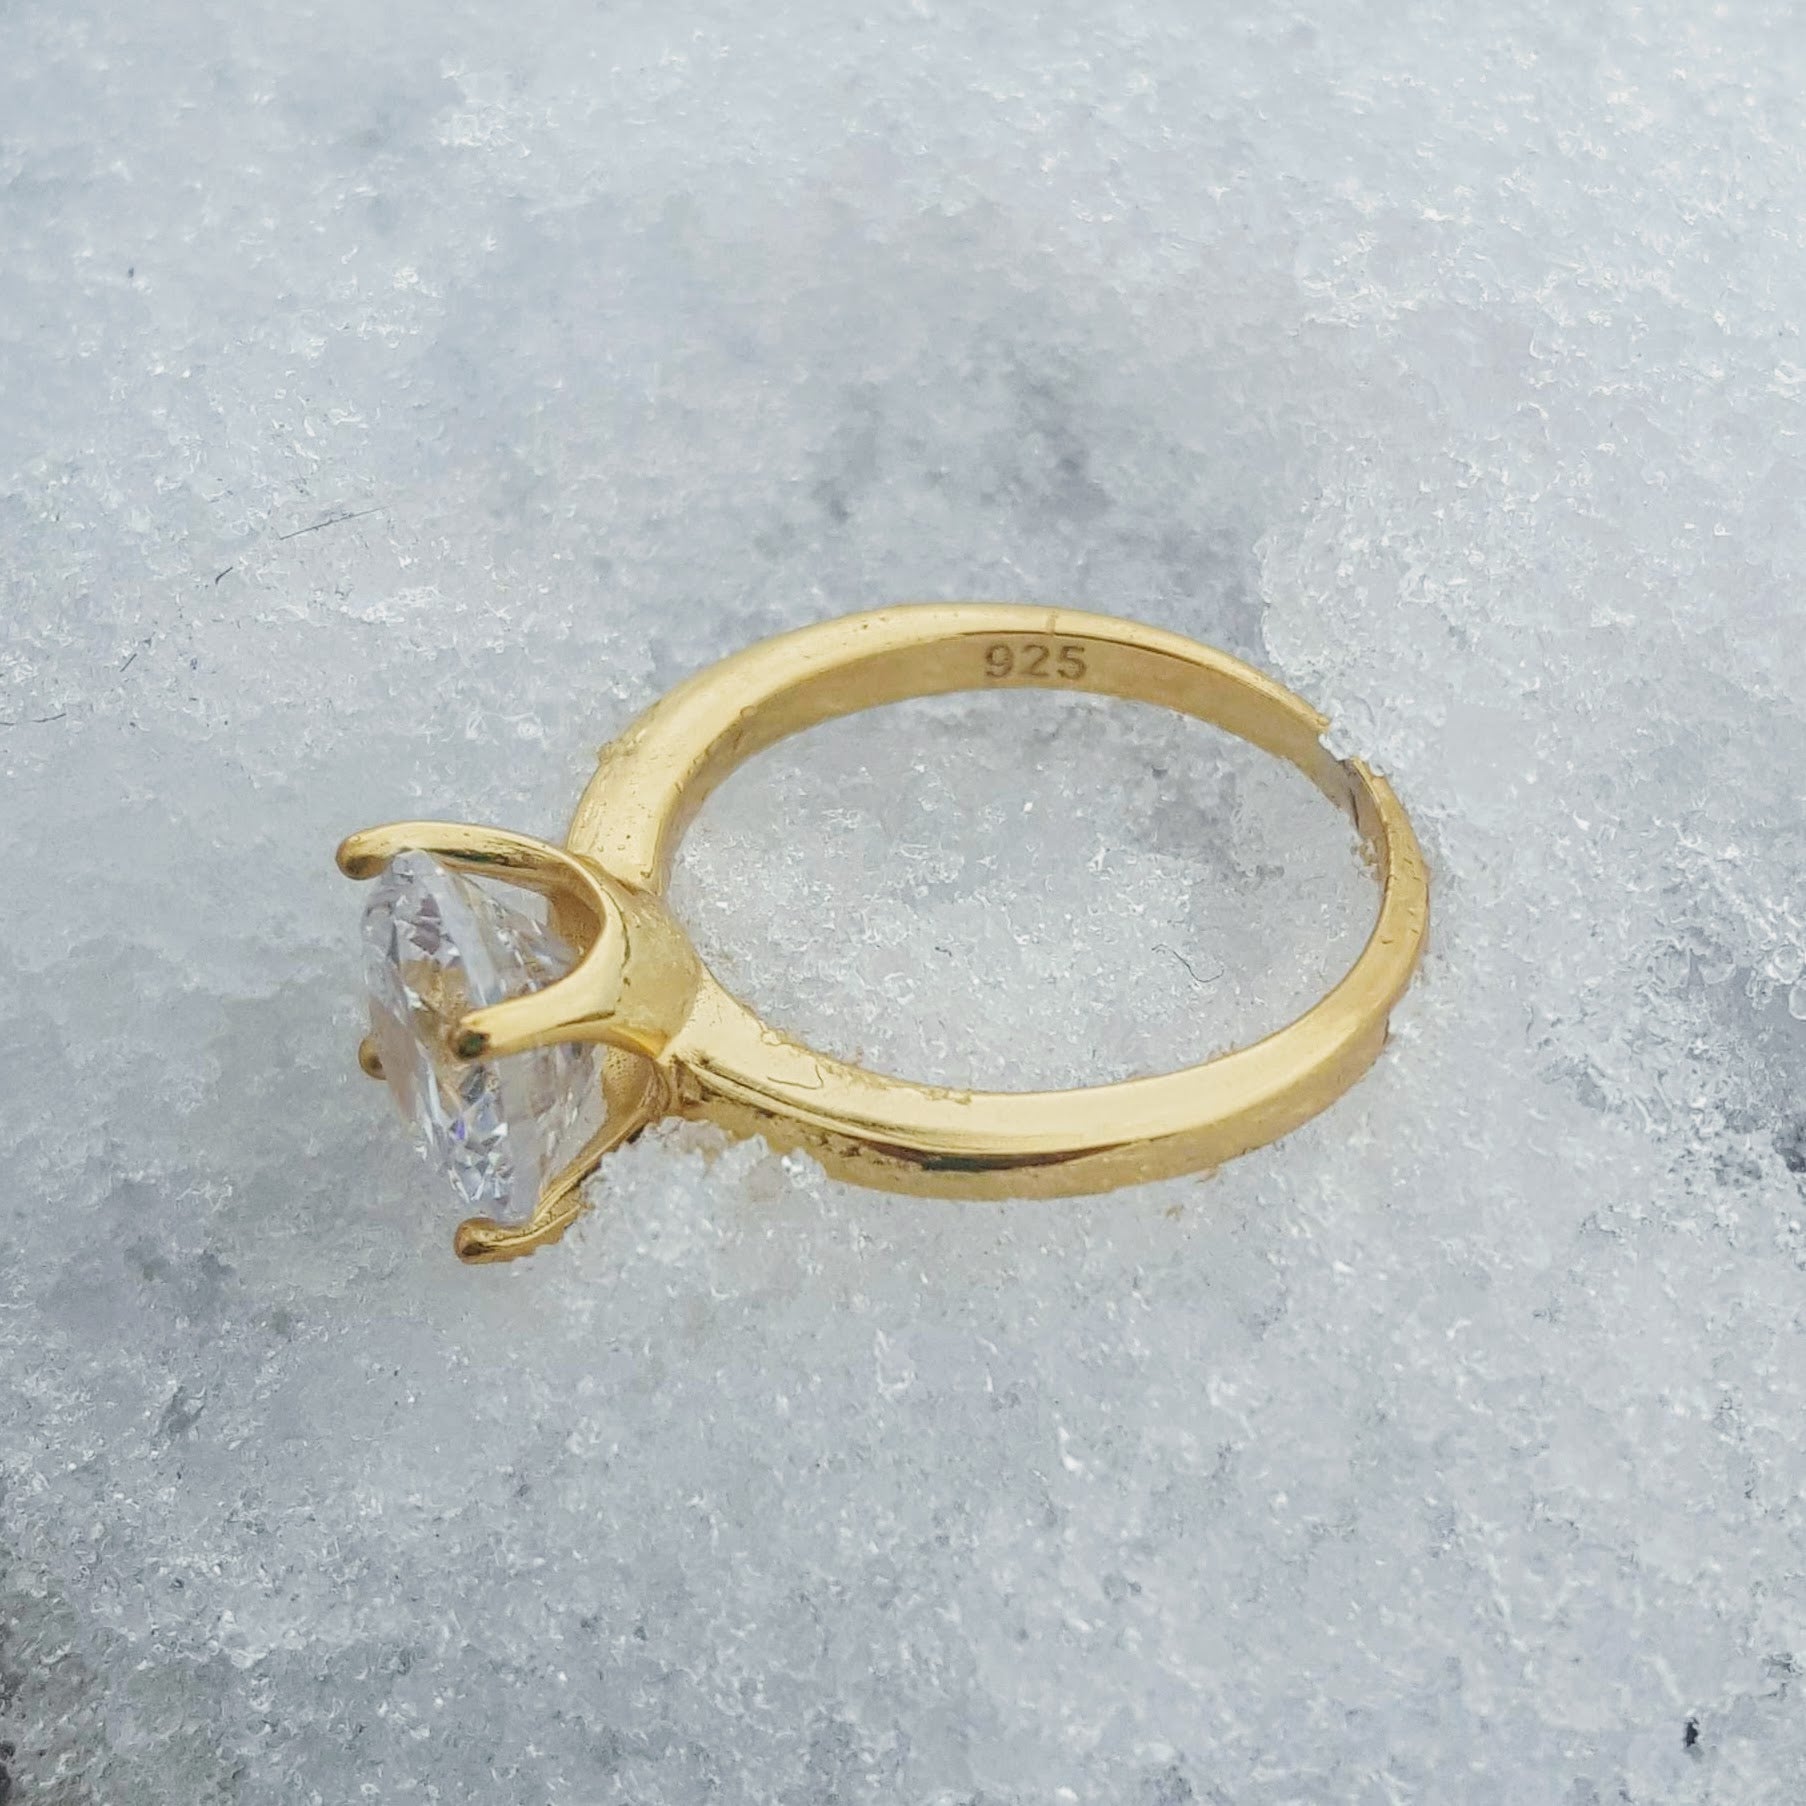 Yellow gold wedding ring with .925 Stamped hallmark